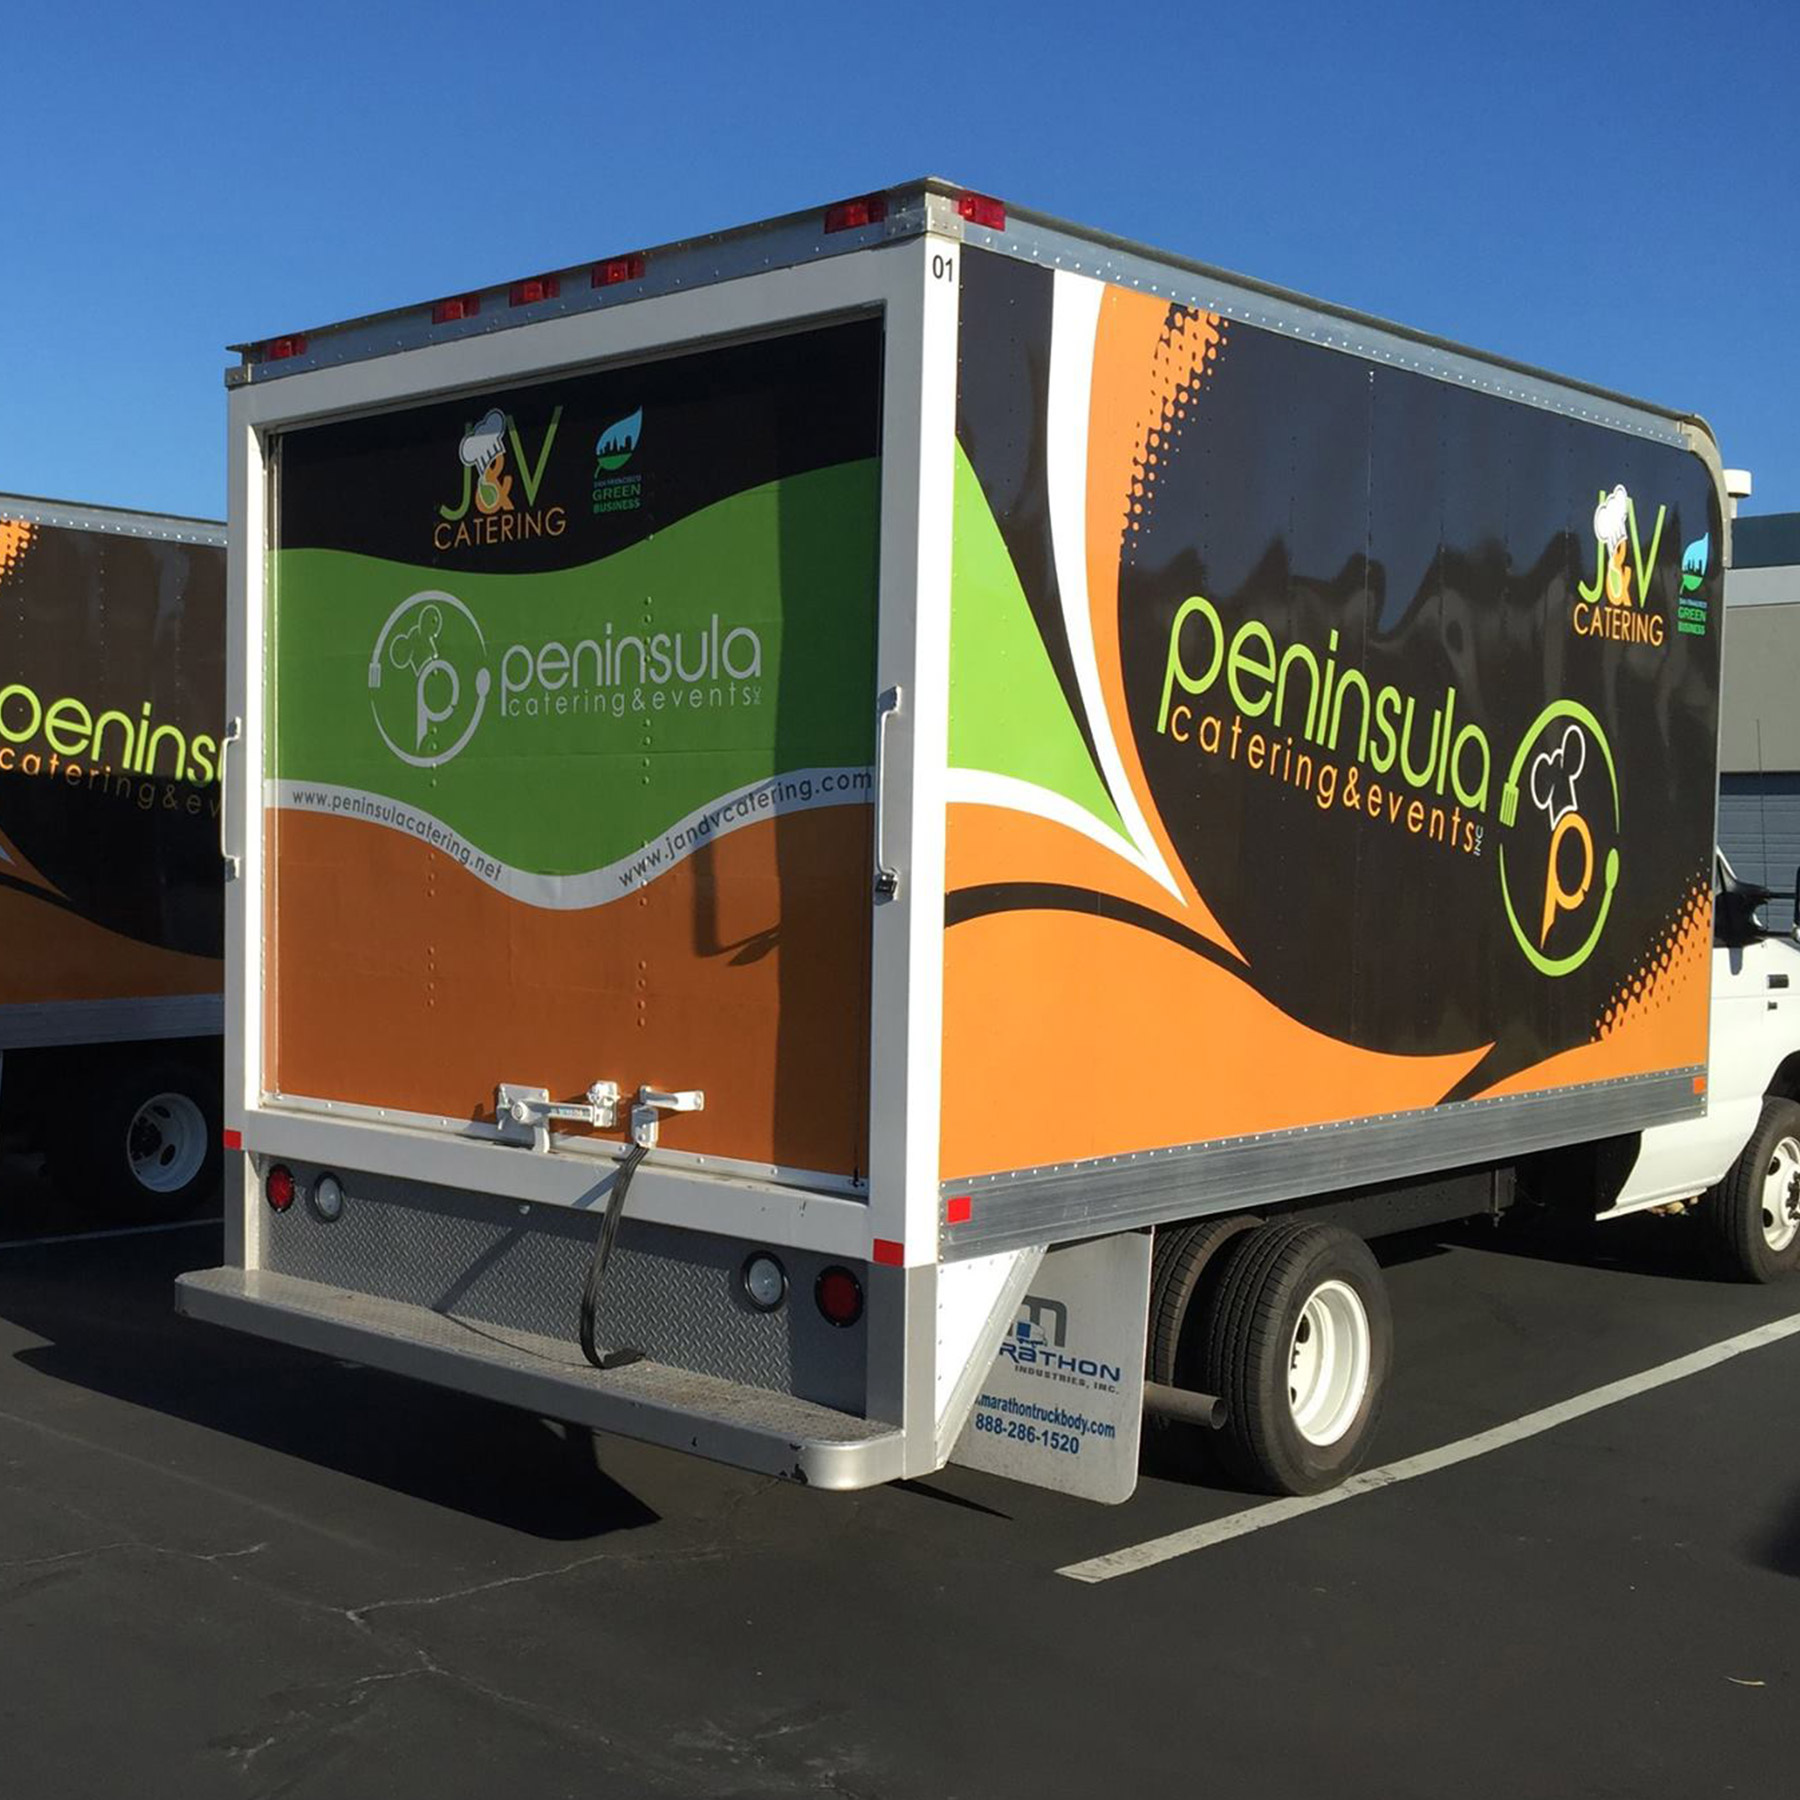 Peninsula Catering & Events box truck graphic